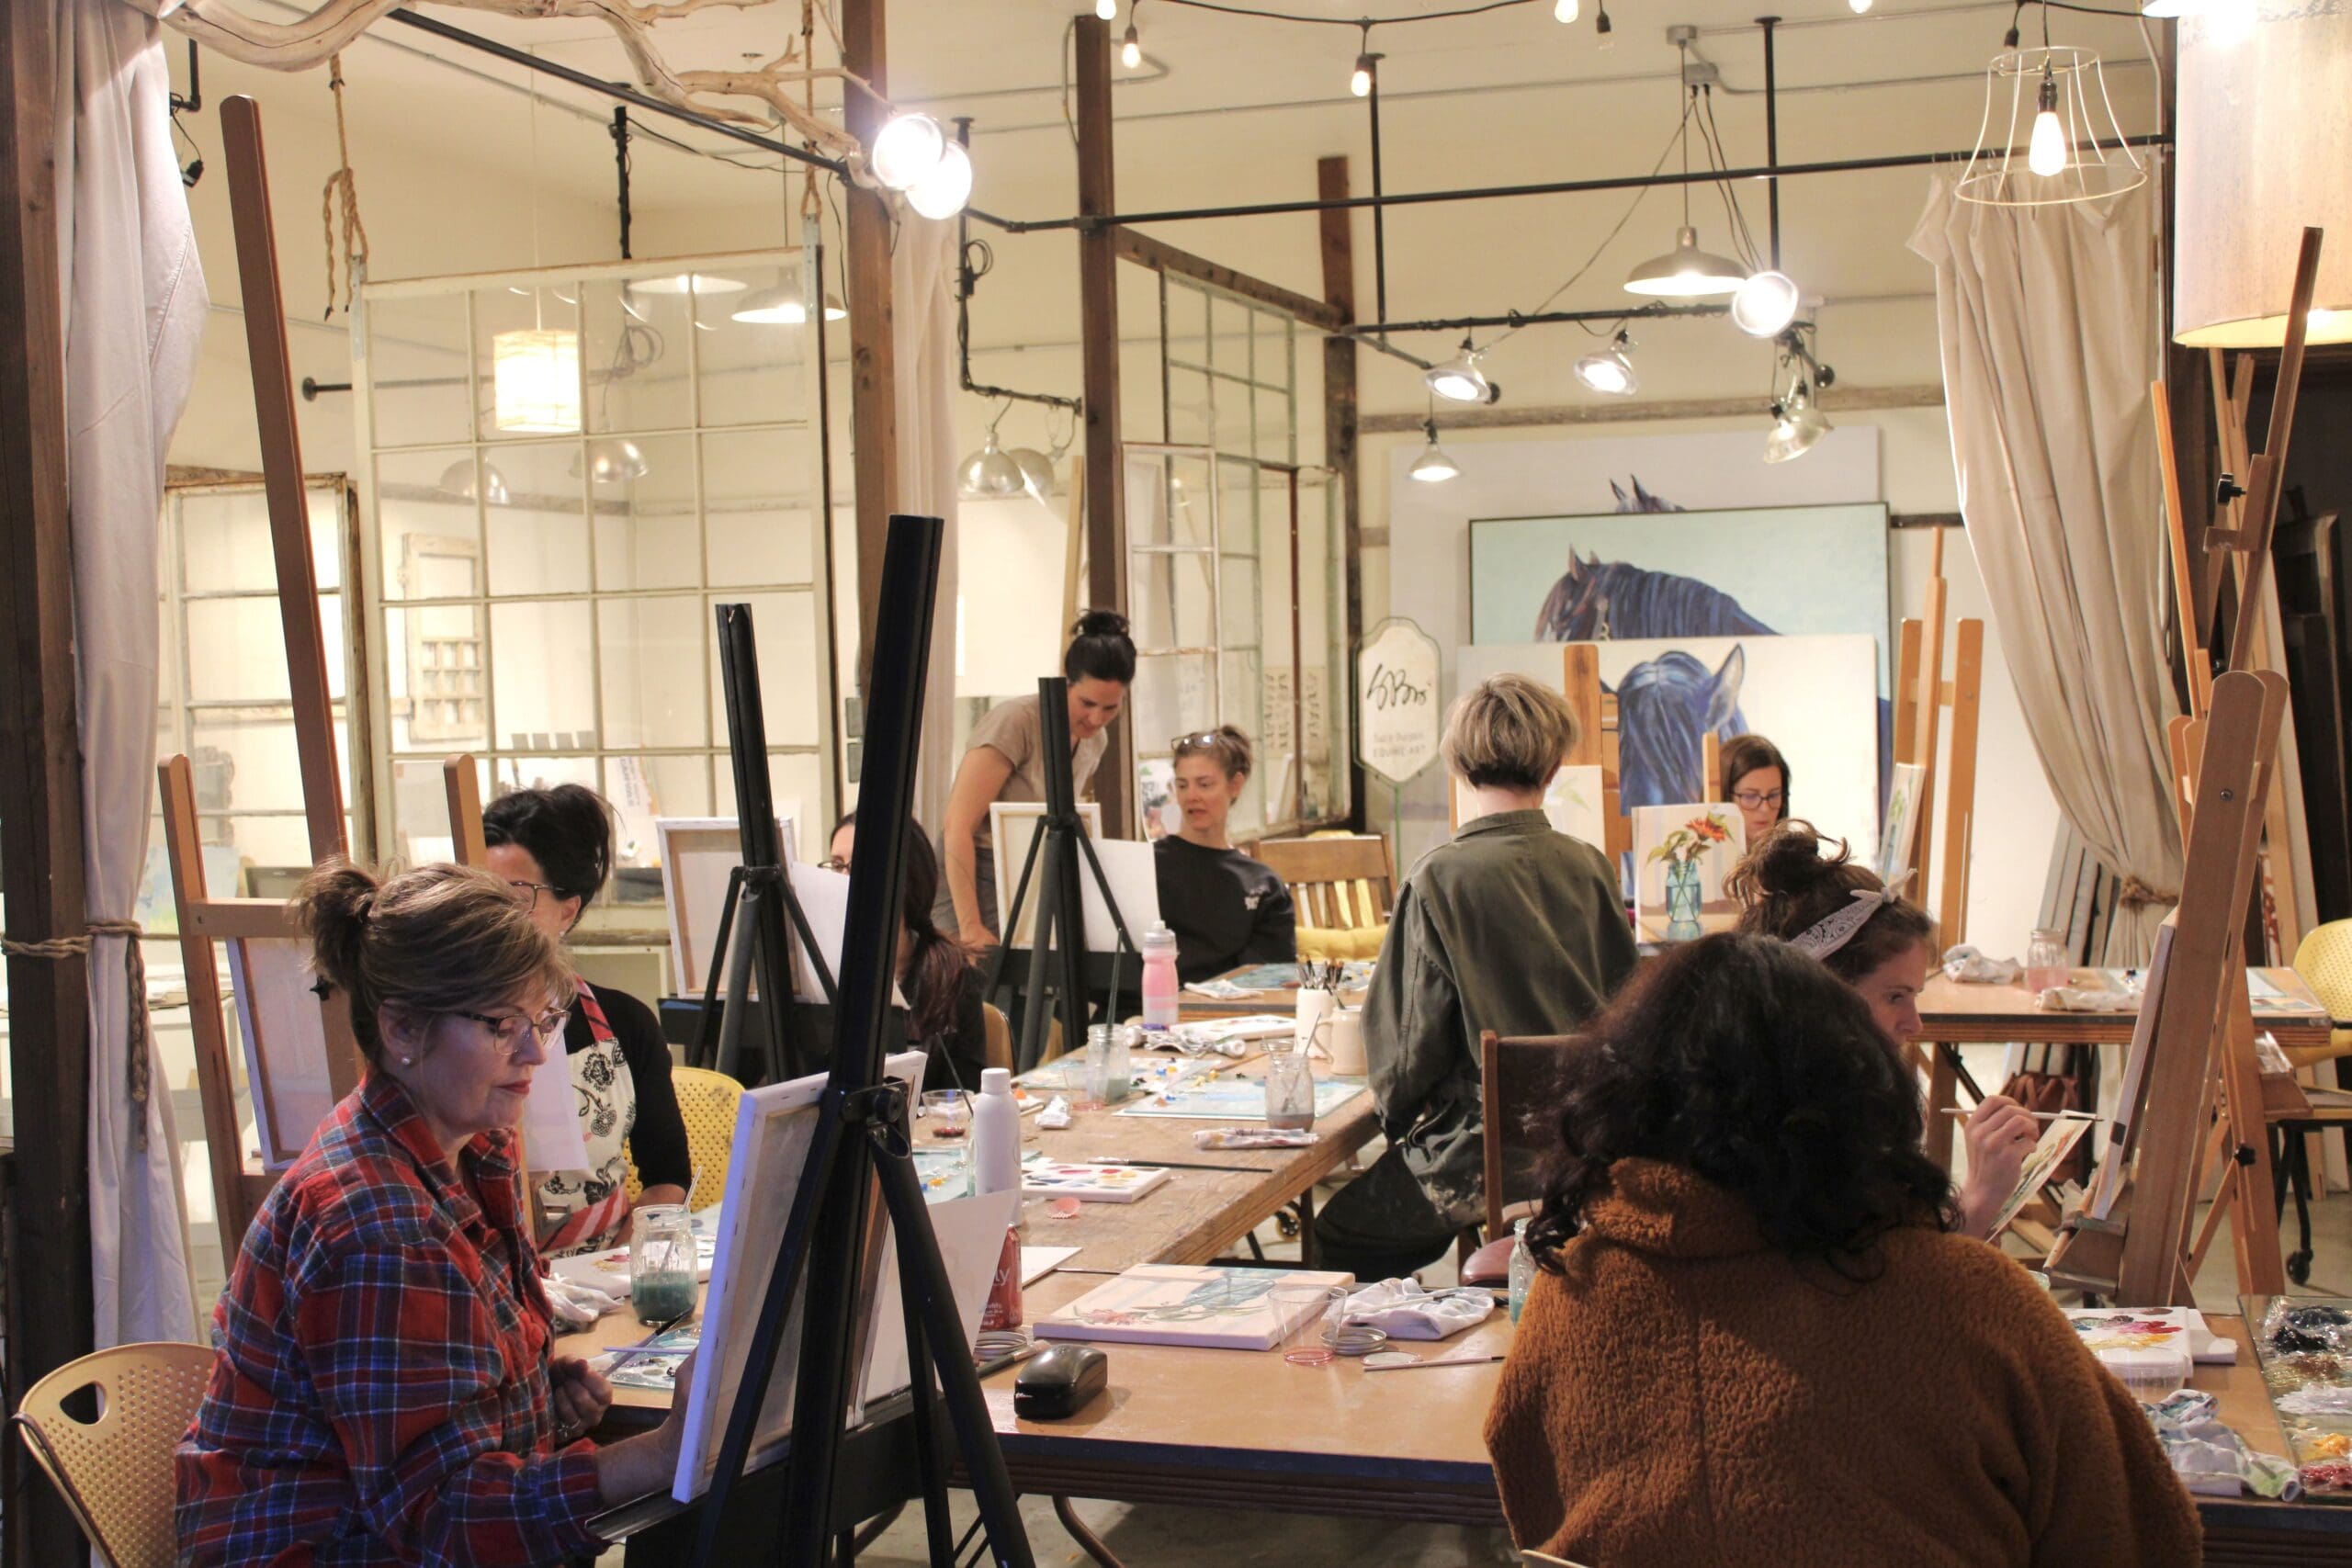 A photo of oil painting students at The Studio painting on easels.